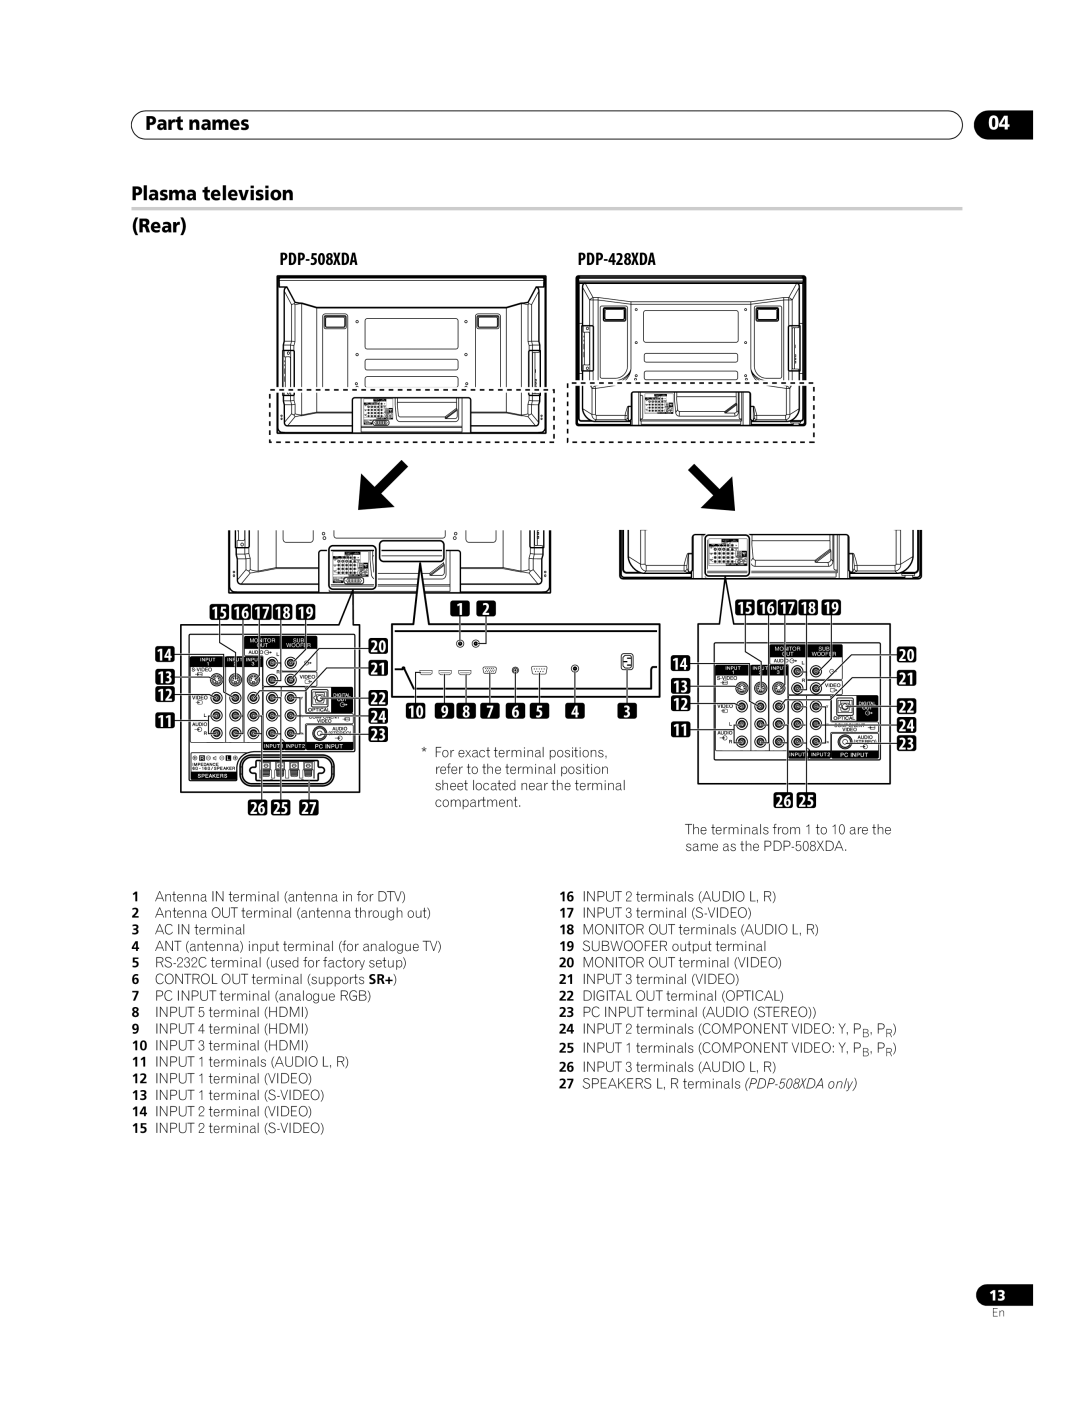 Pioneer PDP-508XDA, PDP-428XDA Part names, Plasma television Rear, 15 16 17 18, For exact terminal positions, compartment 